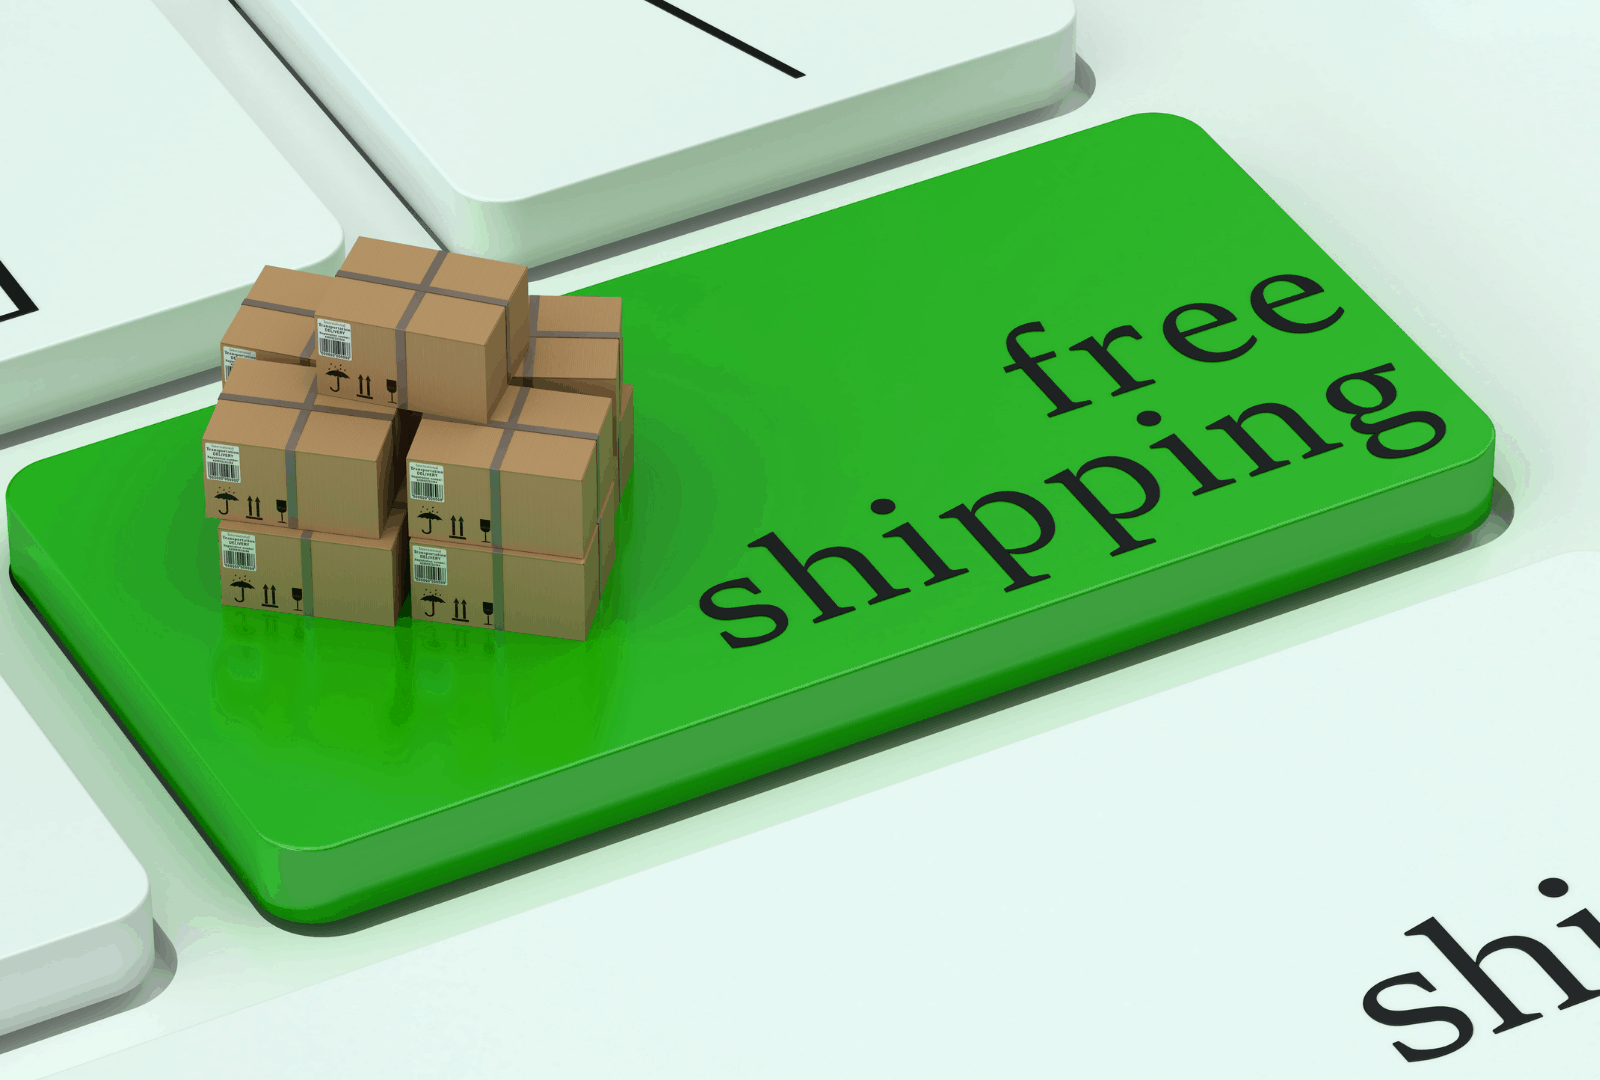 Free Shipping written on bright green button on laptop stacked with brown boxes